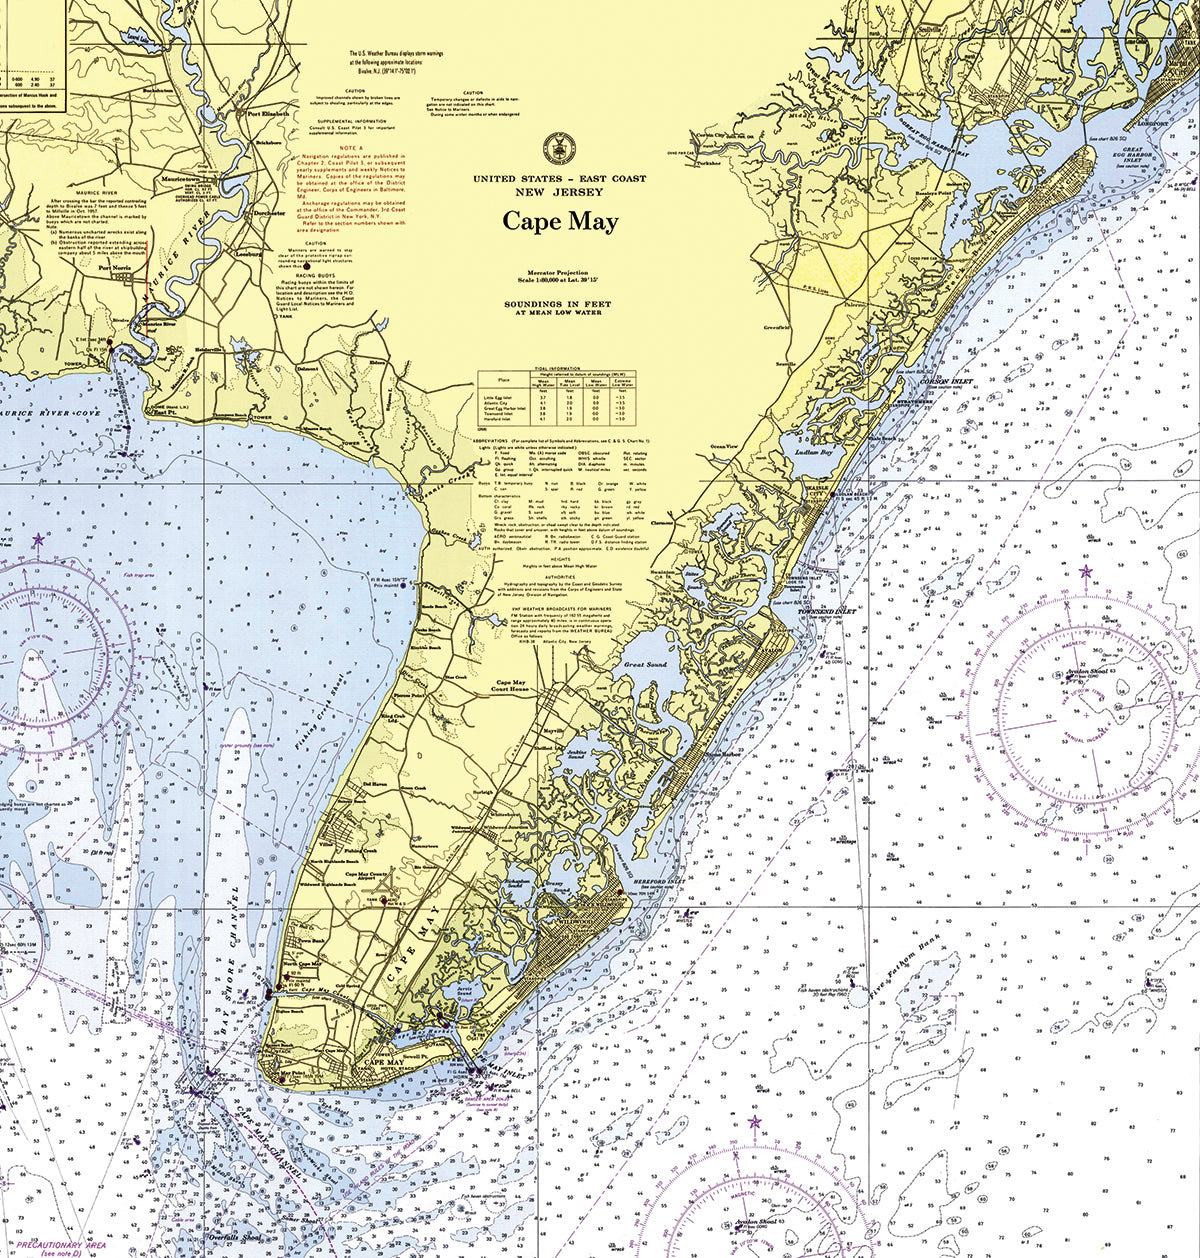 Cape May, NJ Vintage Nautical Chart Shower Curtain